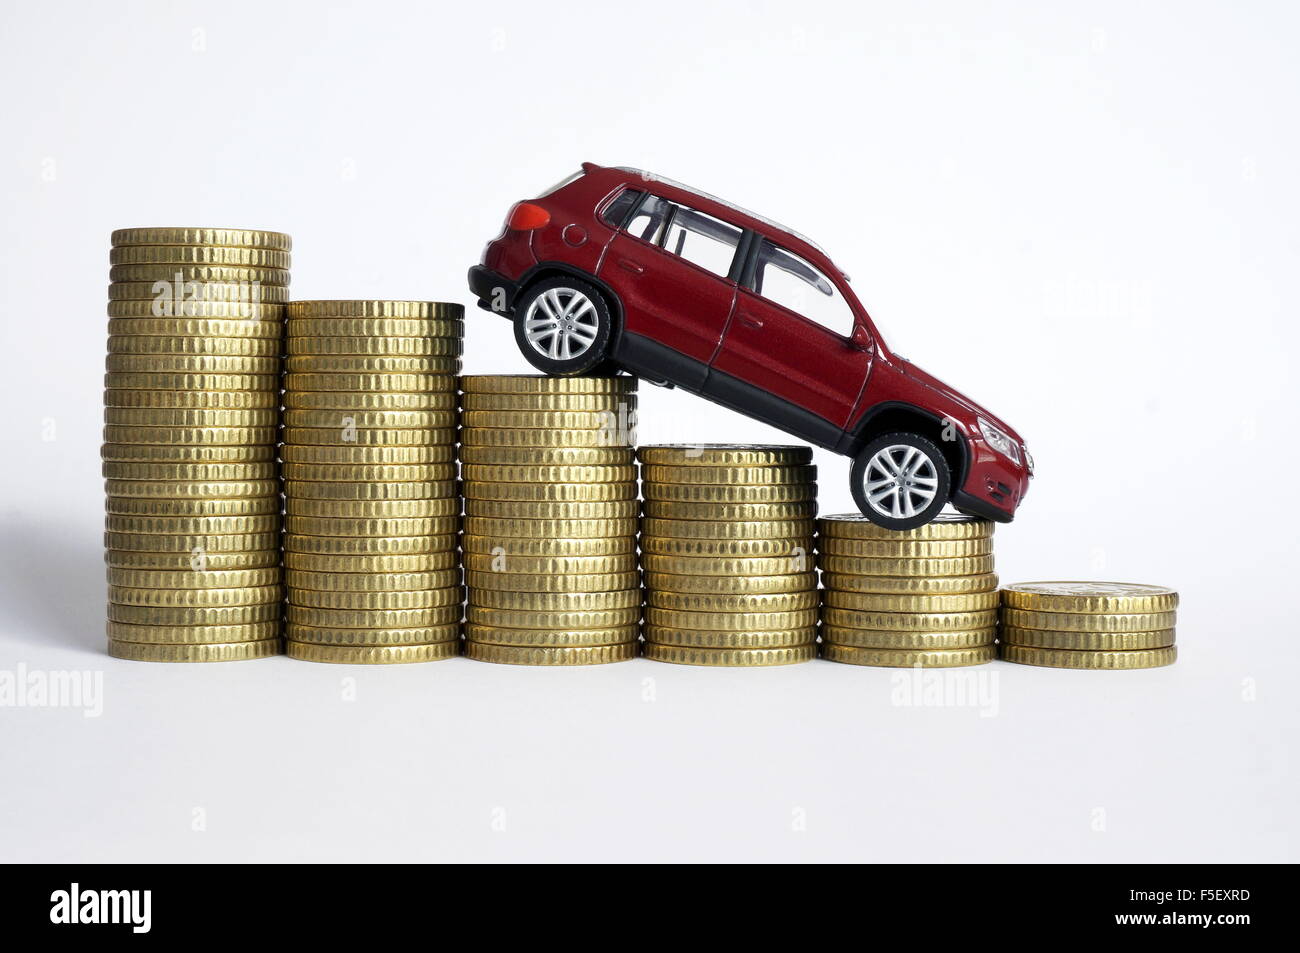 ILLUSTRATION - A Volkswagen car model 'VW Tiguan' on decreasing money piles. The photo was taken on 16 October 2015. Photo: S. Steinach - NO WIRE SERVICE - Stock Photo